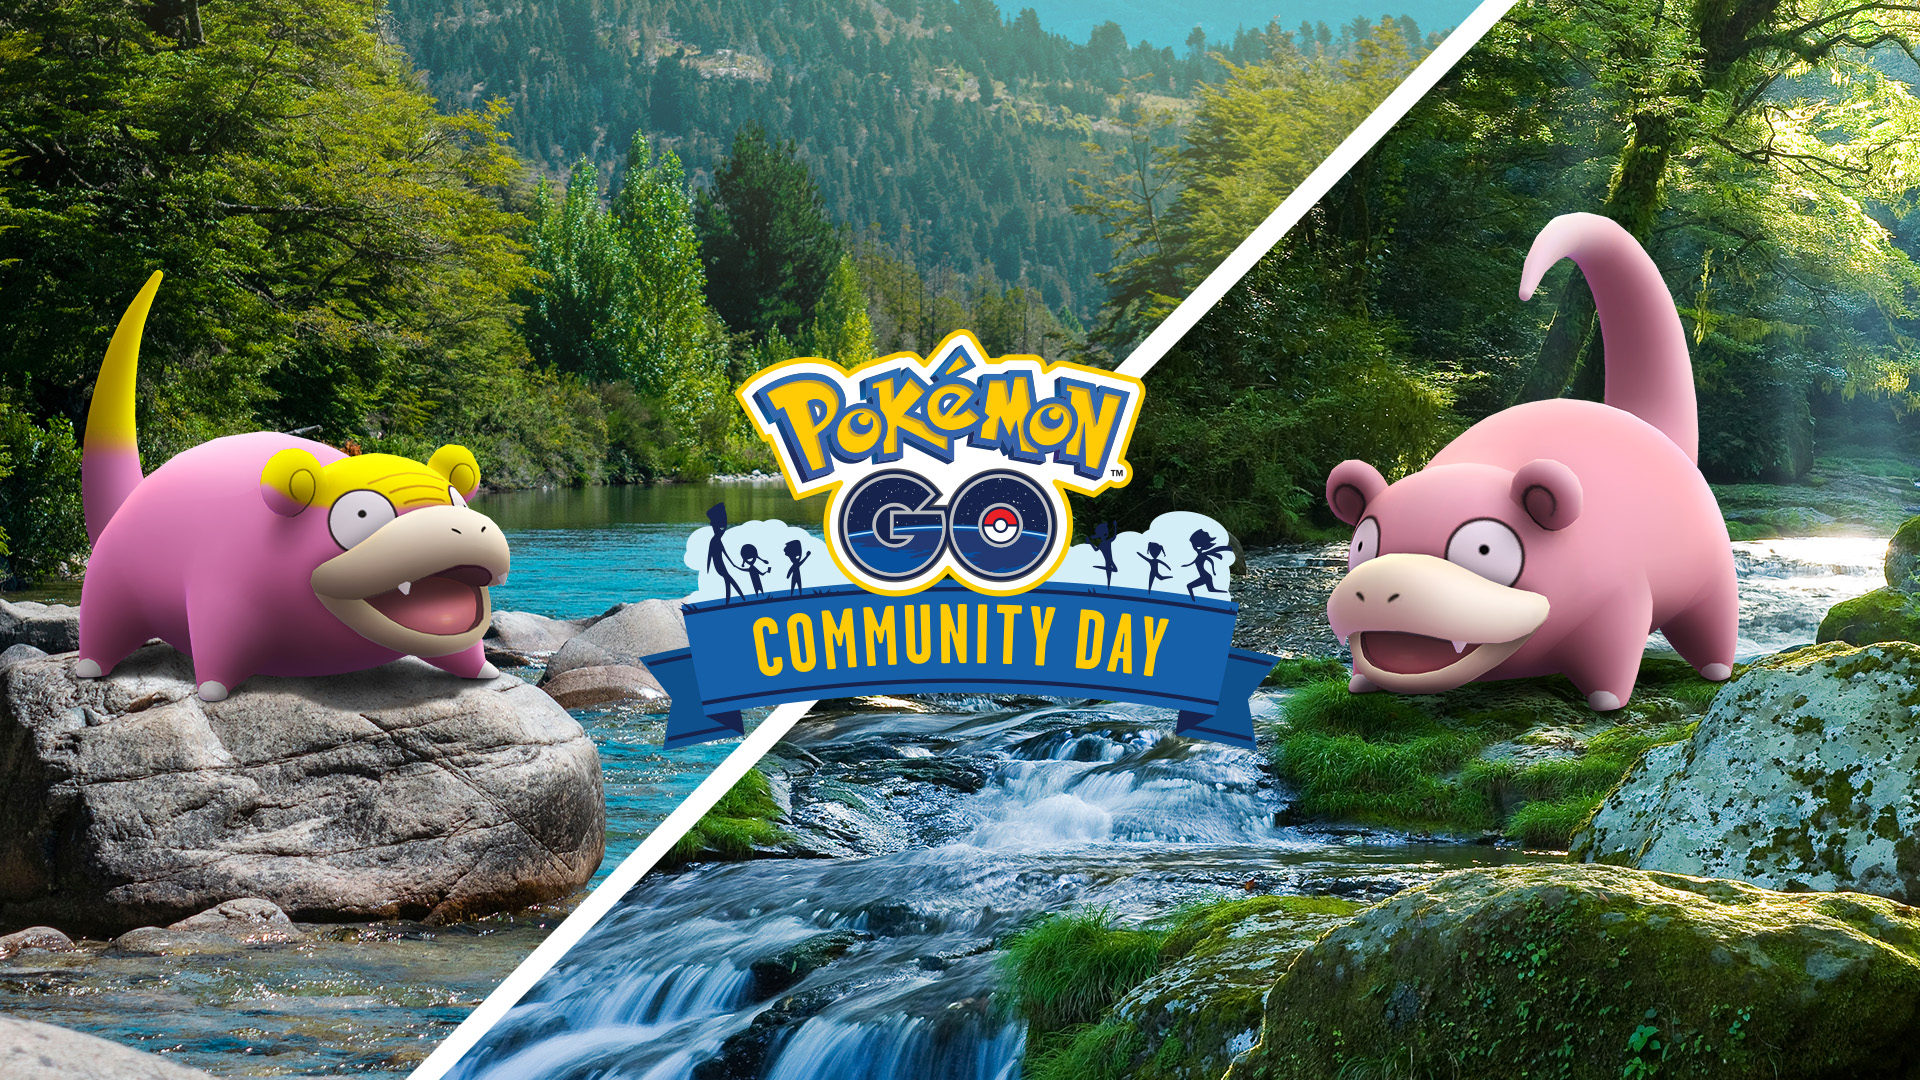 We at universel blog are excited to share with you our comprehensive guide to Pokemon Go Community Day